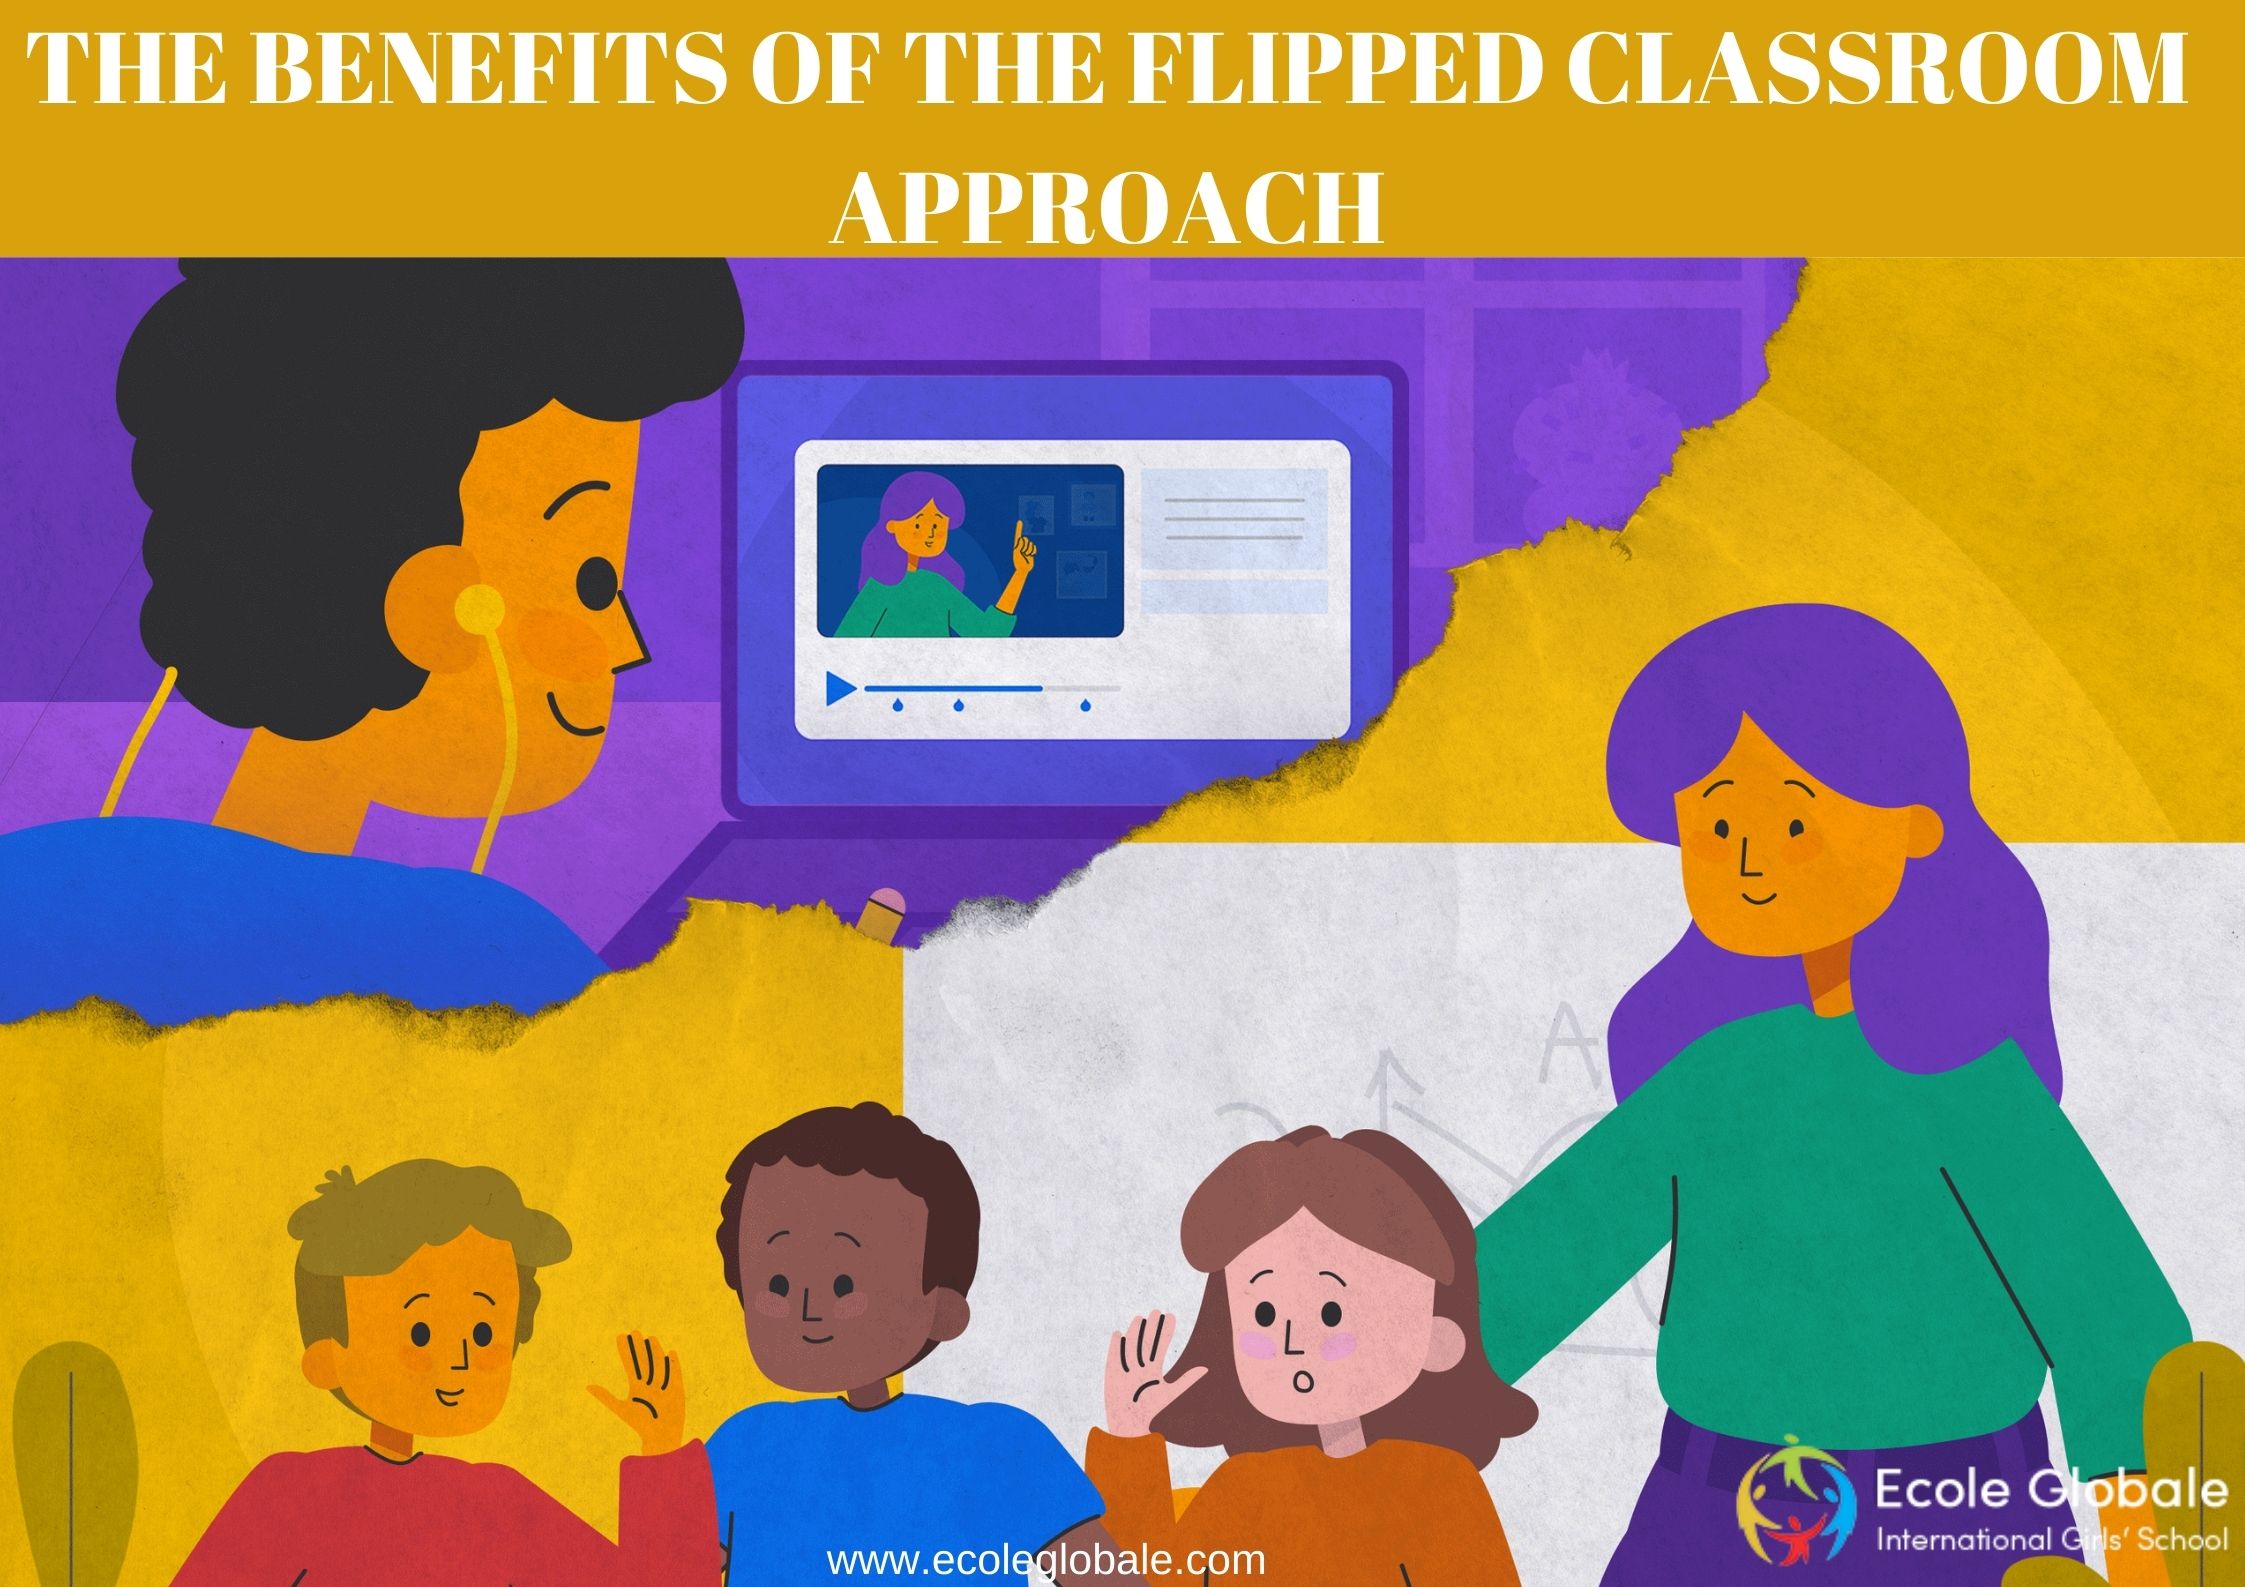 You are currently viewing THE BENEFITS OF THE FLIPPED CLASSROOM APPROACH